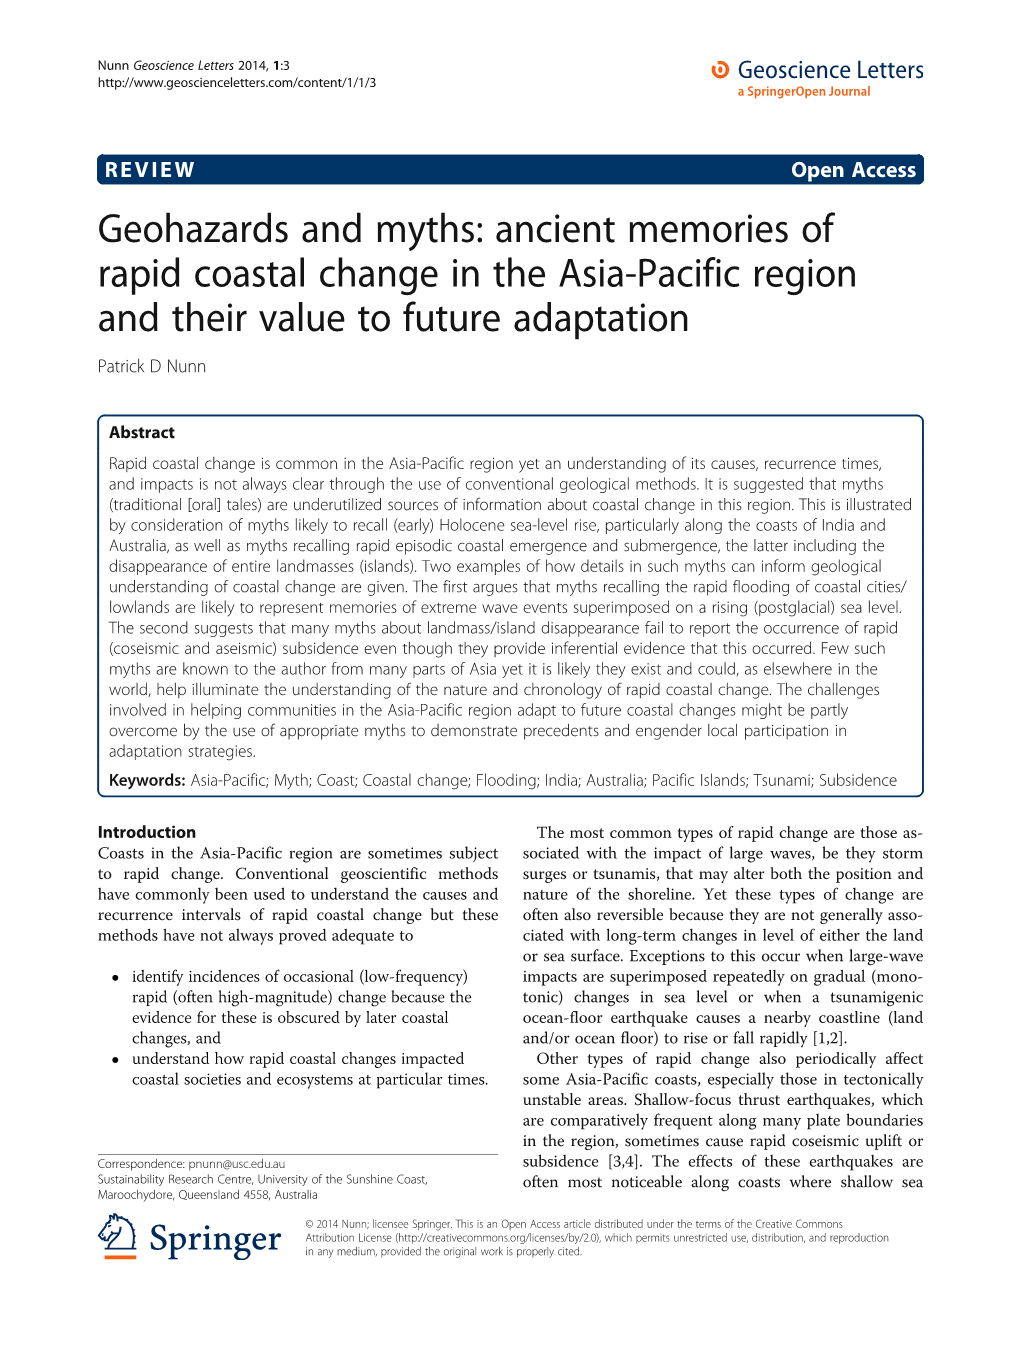 Geohazards and Myths: Ancient Memories of Rapid Coastal Change in the Asia-Pacific Region and Their Value to Future Adaptation Patrick D Nunn